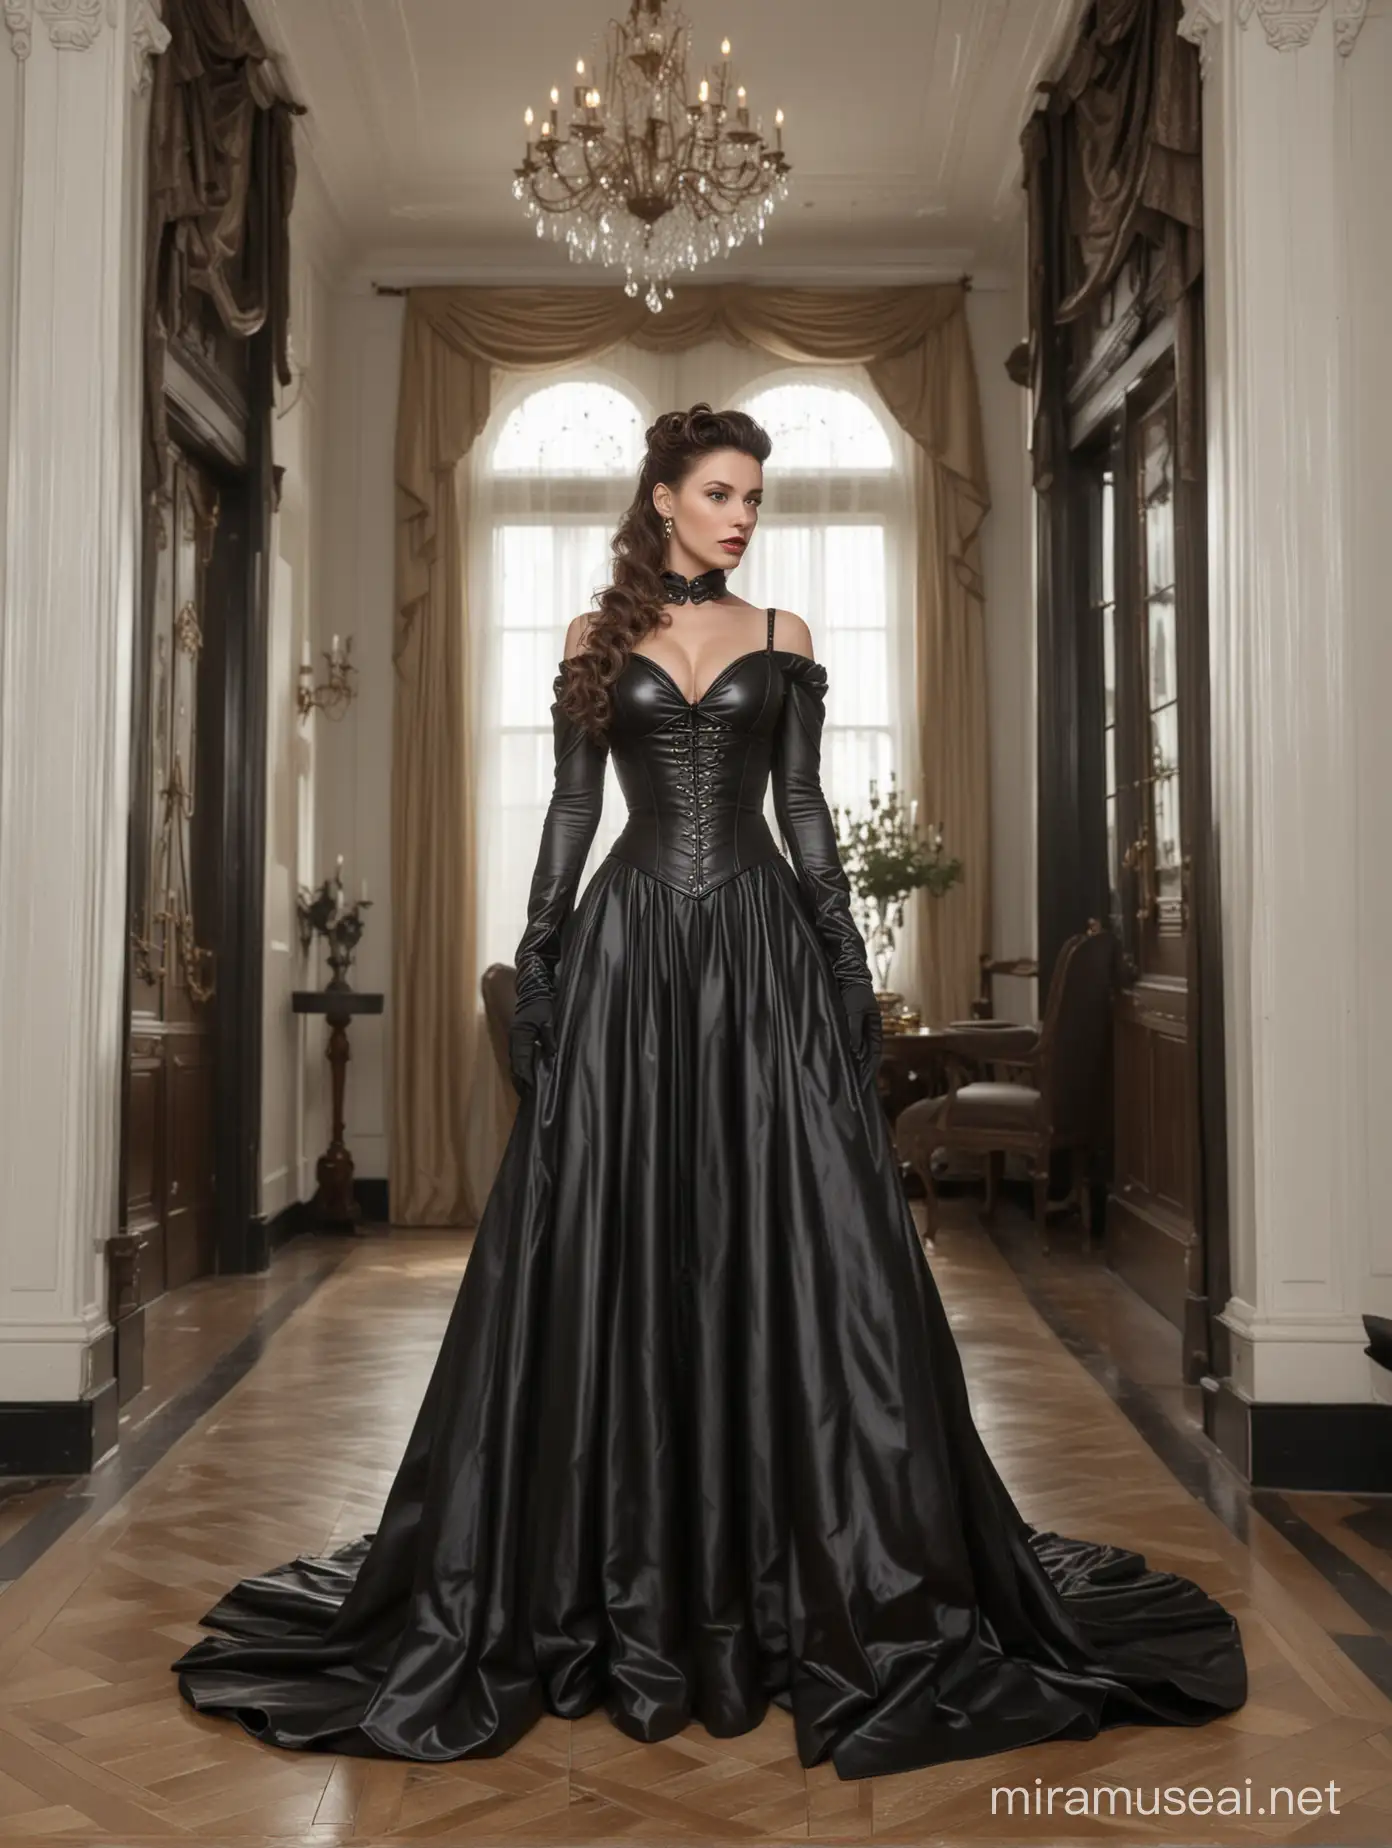 portrait glamour head to toe, dominatrix elegance look leather satin victorian ballgown floorlength, enormous breast cleavage governess high heels on a mansion short legs, golden detailed in the clothes,  long black wavy ponytail cascades over her outfit,